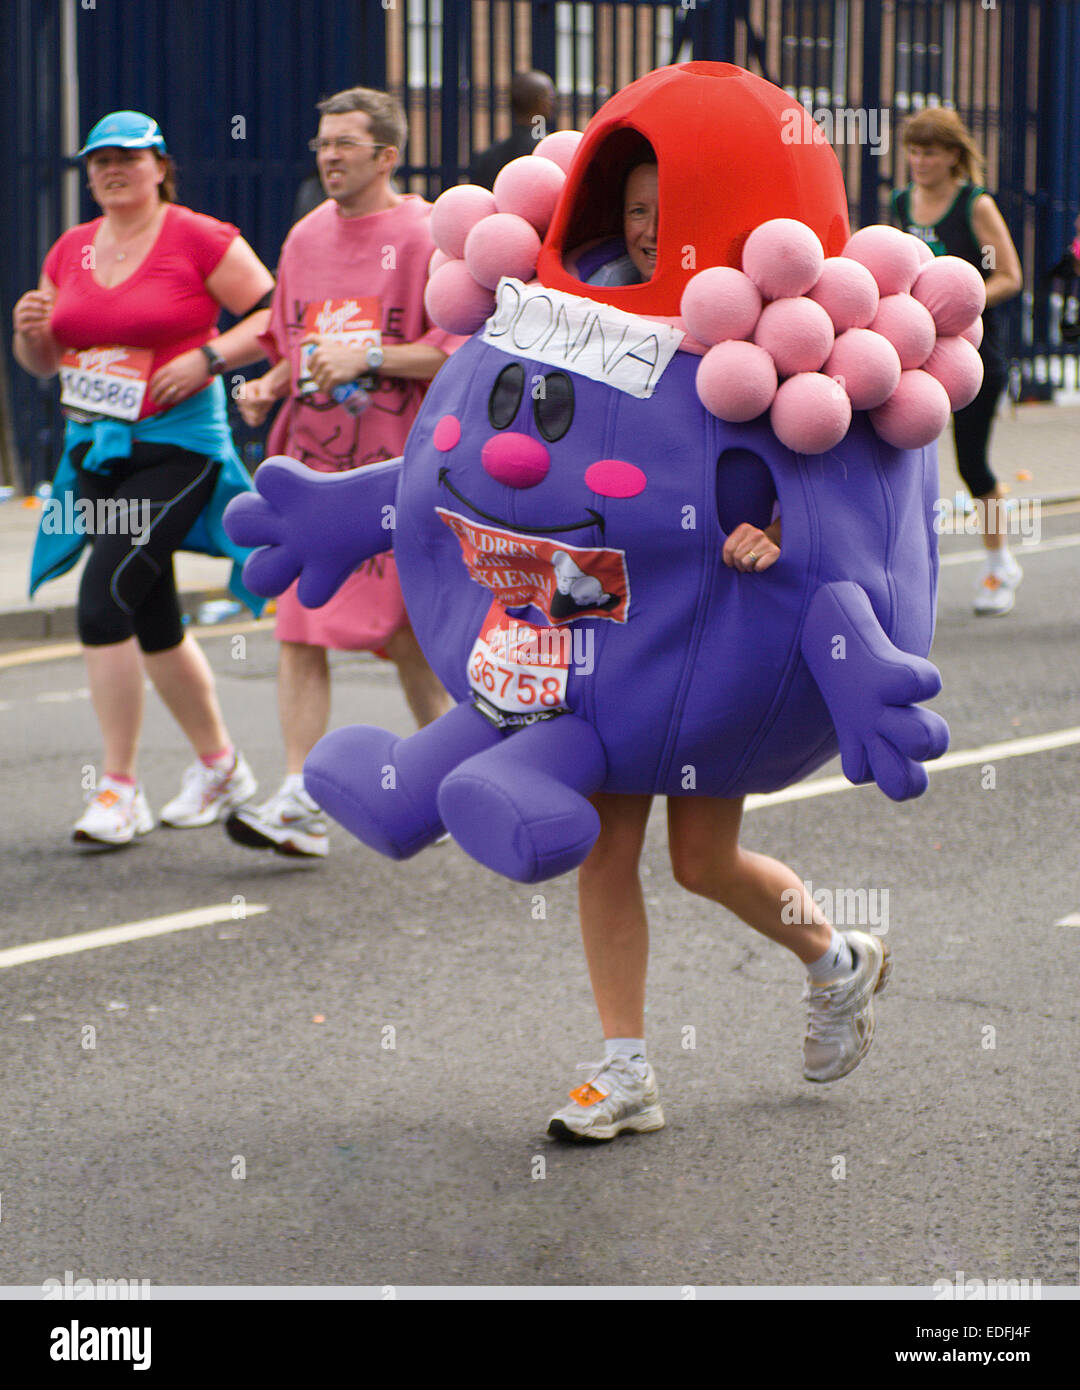 A runner in the London Marathon has made life difficult for herself by wearing a very unwieldy costume. Stock Photo